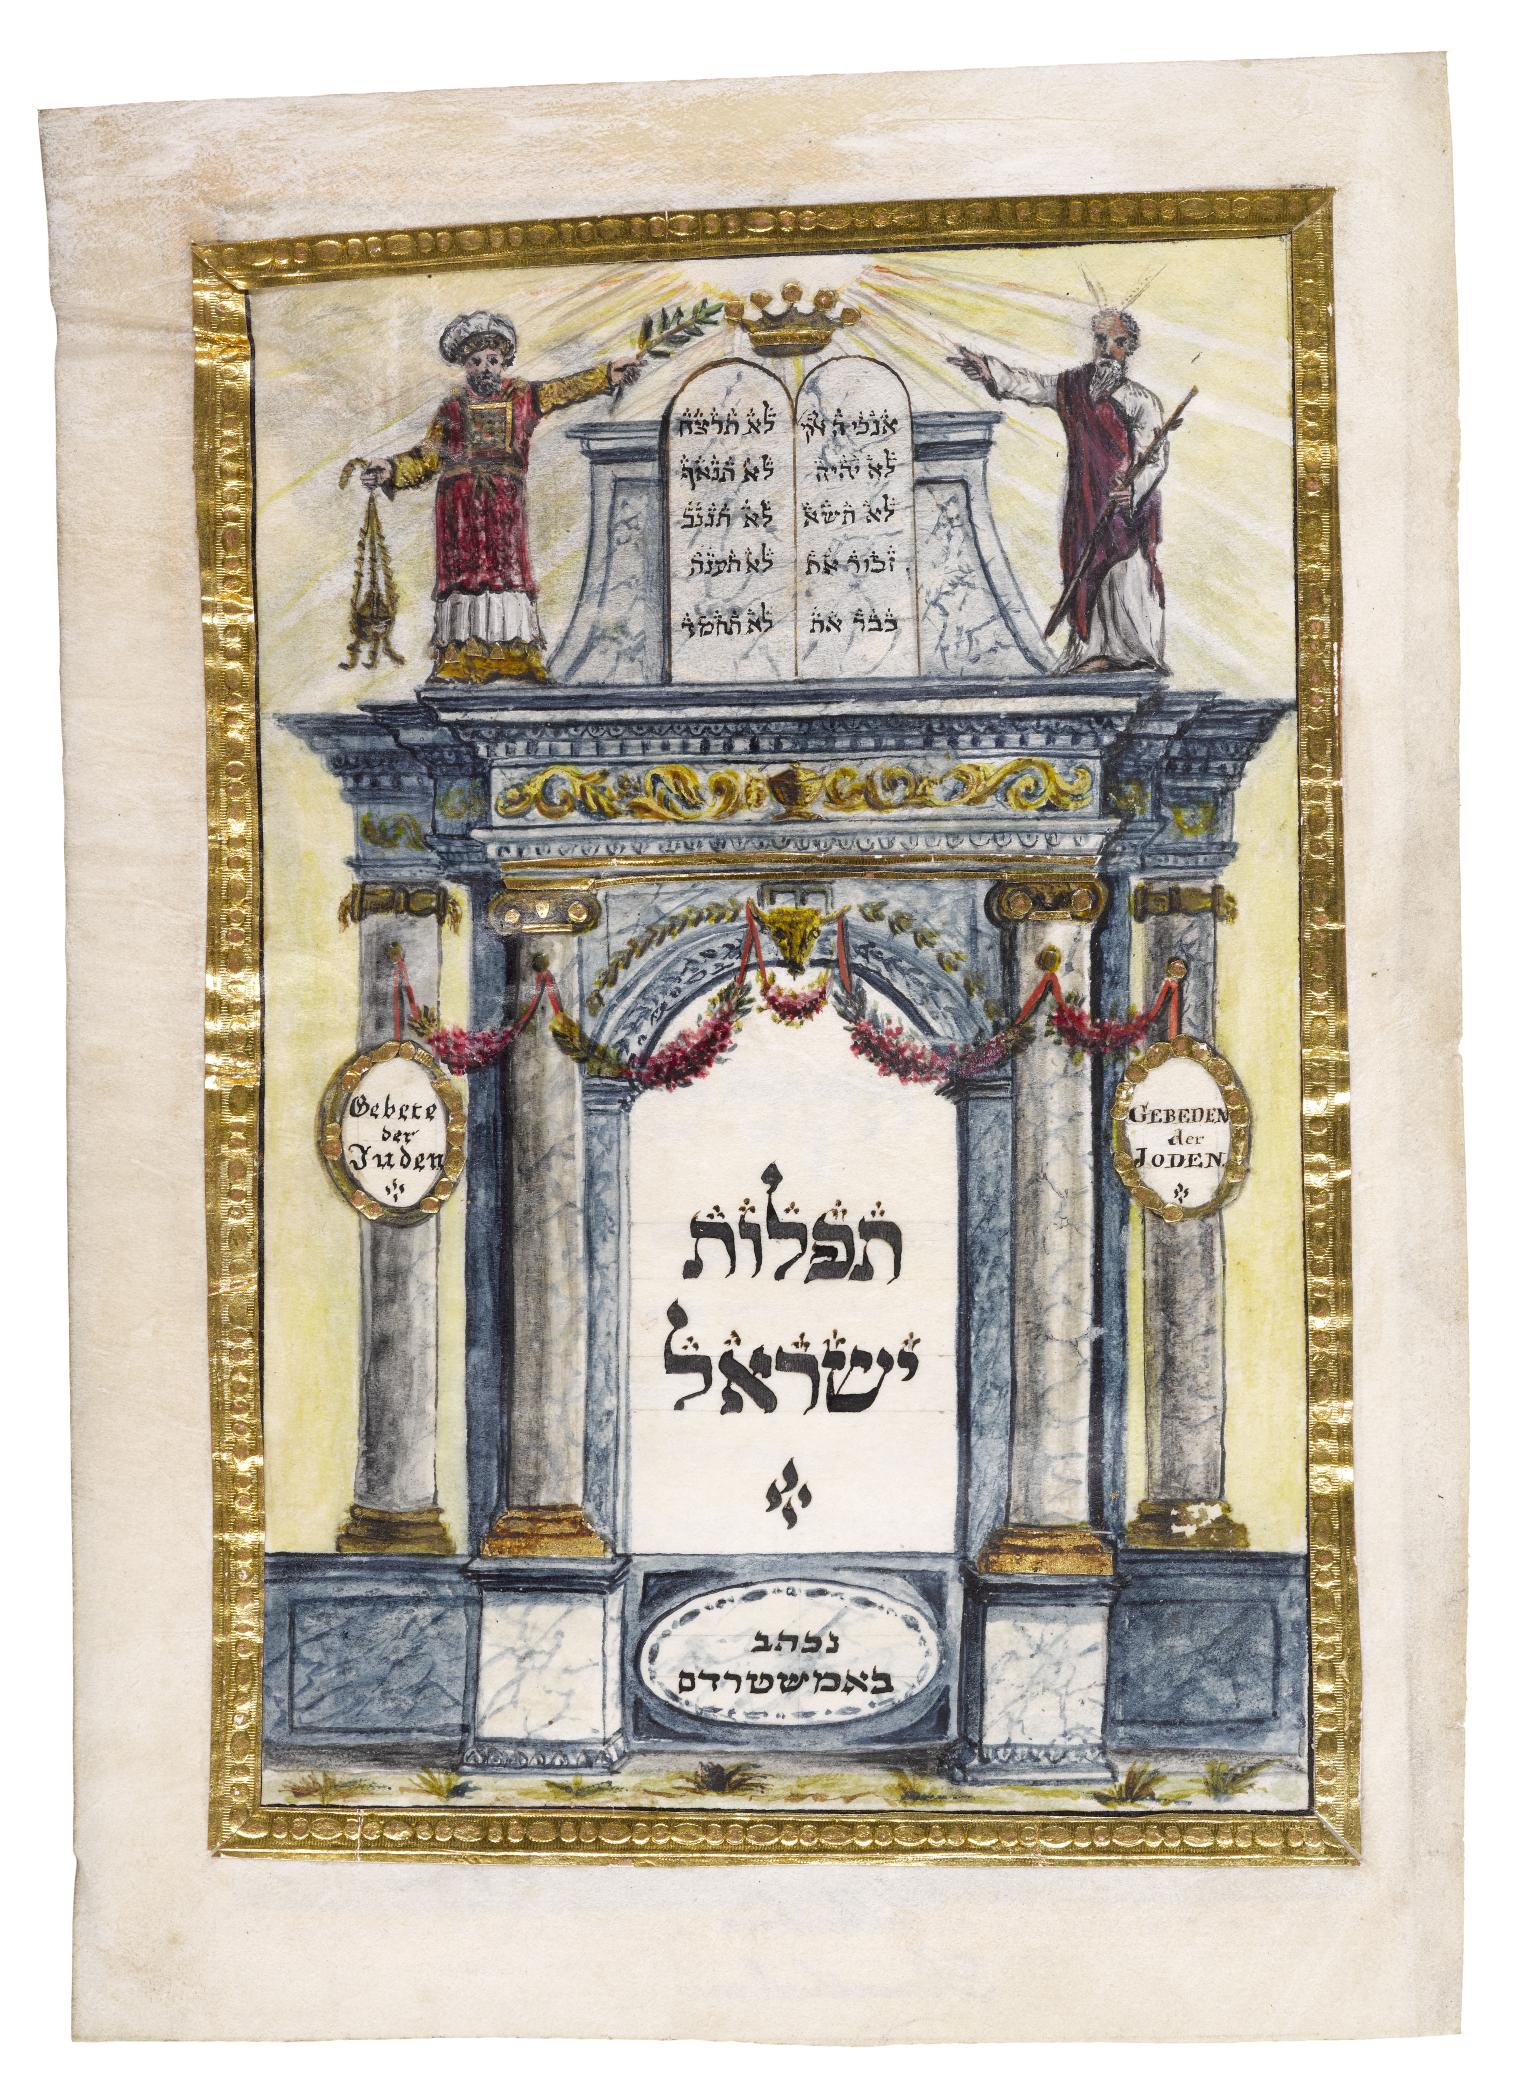 Illuminated Hebrew manuscript page with ornate columns surrounding text, decorated borders, and two figures on top with crown and tablets.